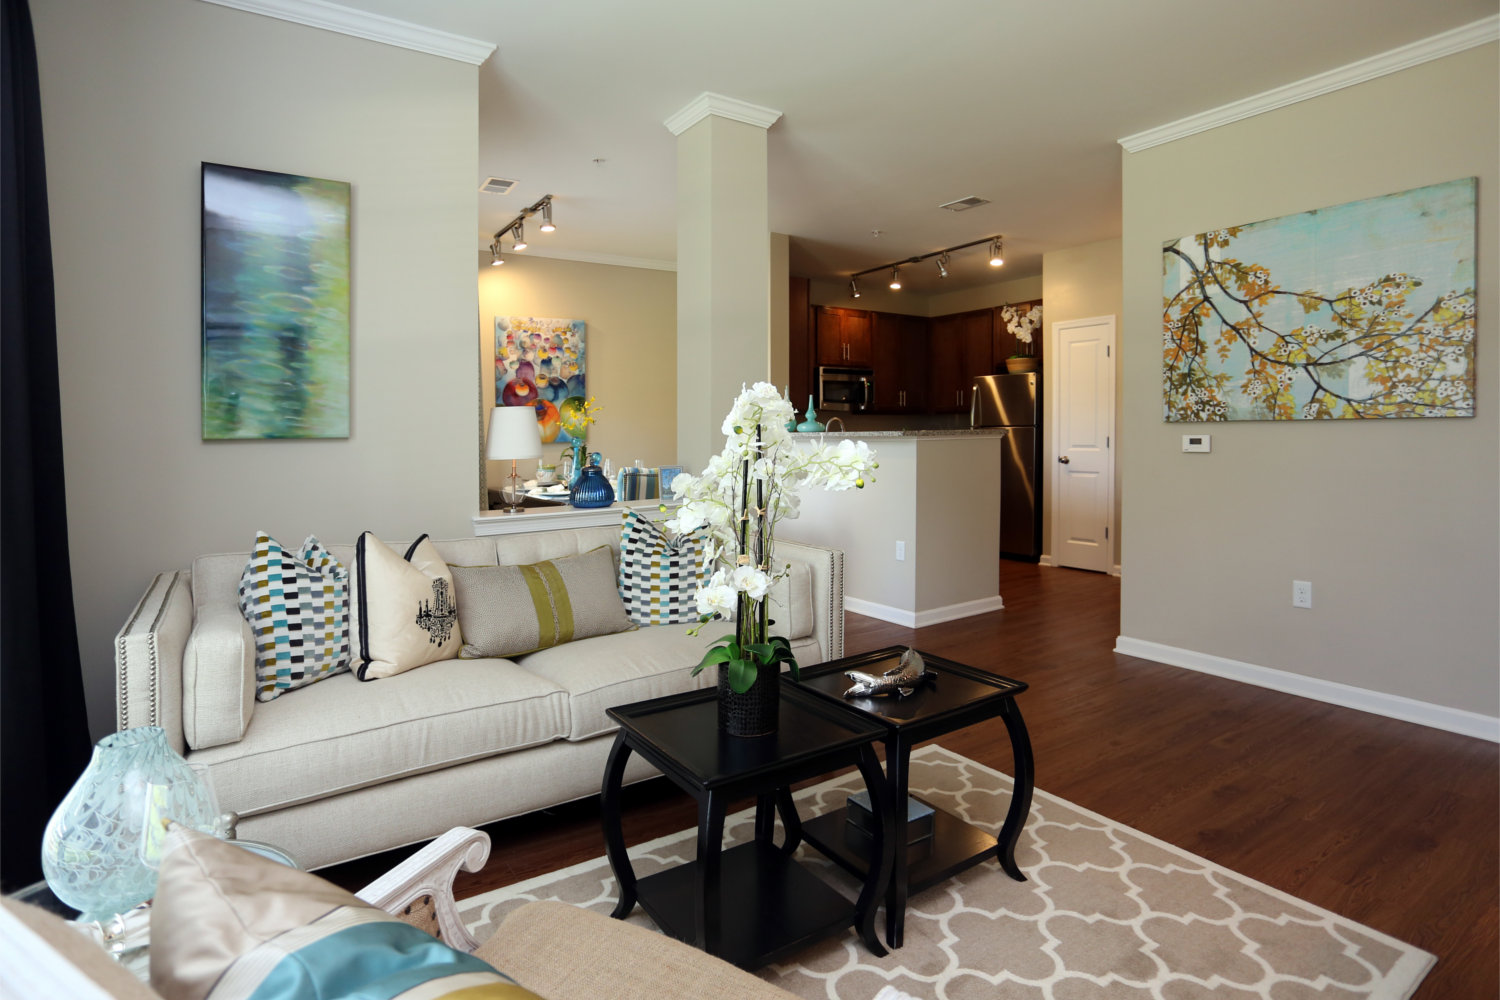 Millstone at Kingsview : Modern open concept layouts help conversation flow as you host friends and family